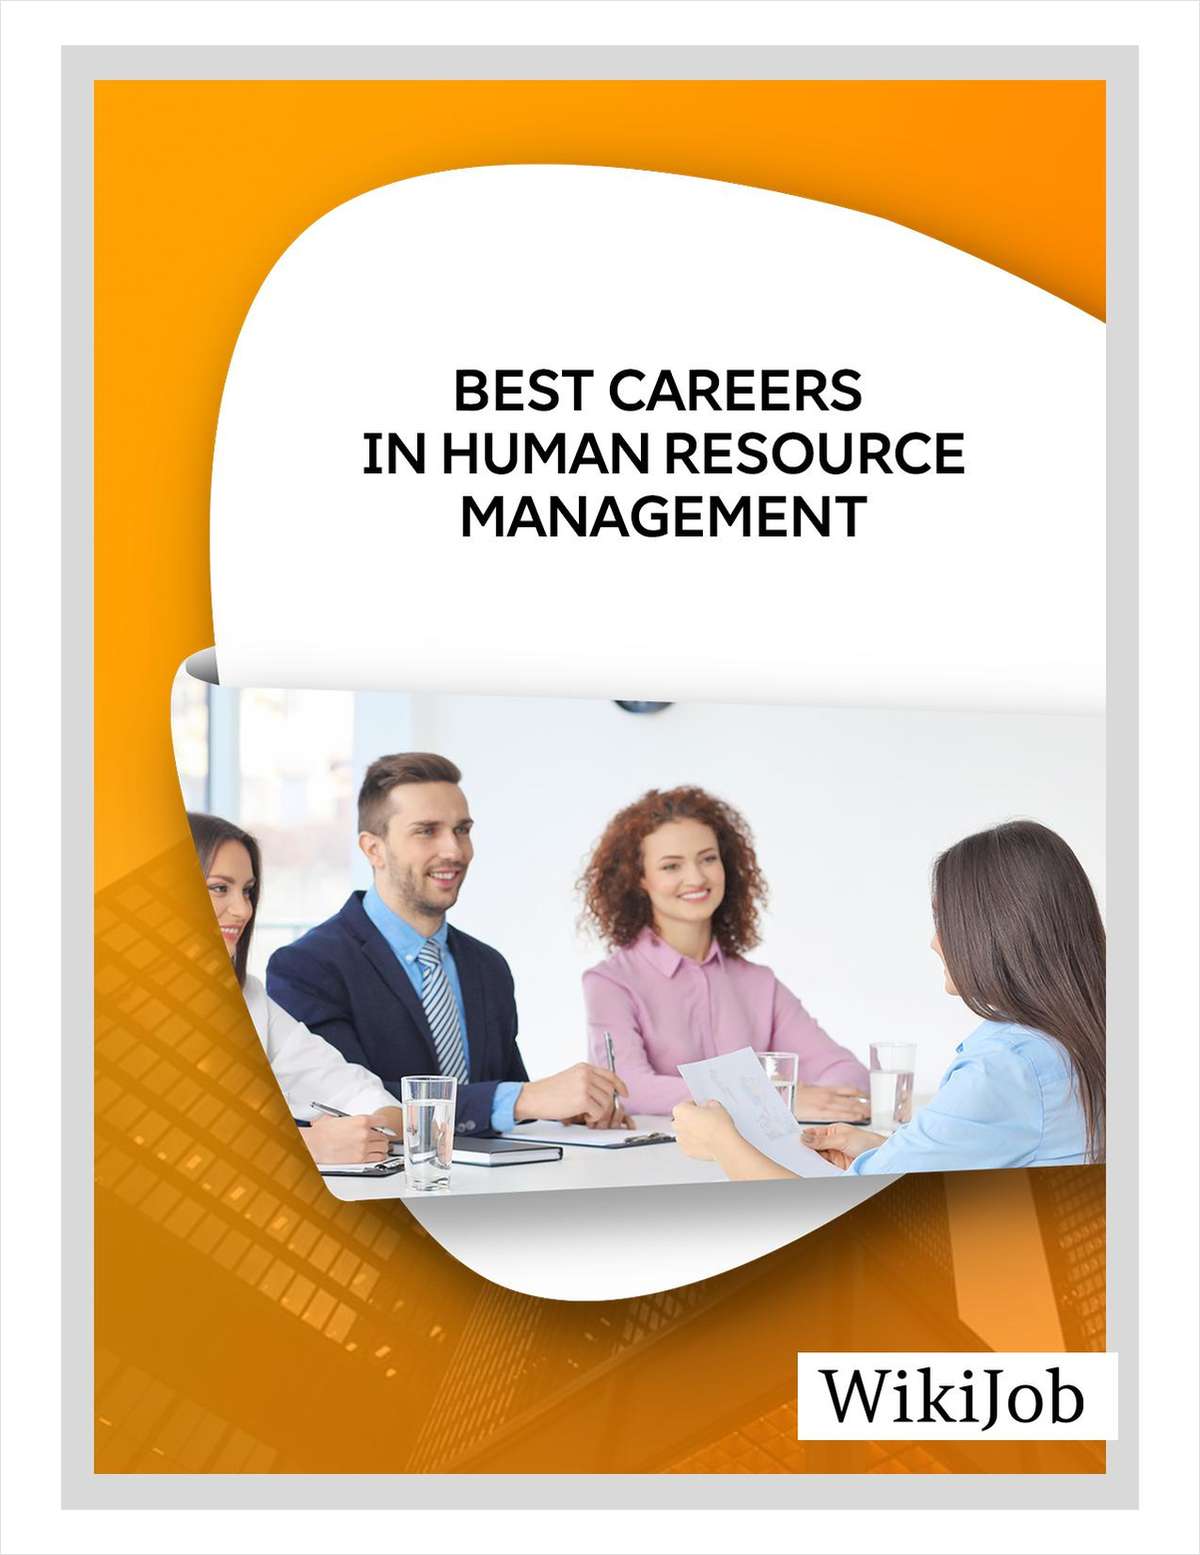 Best Careers in Human Resource Management